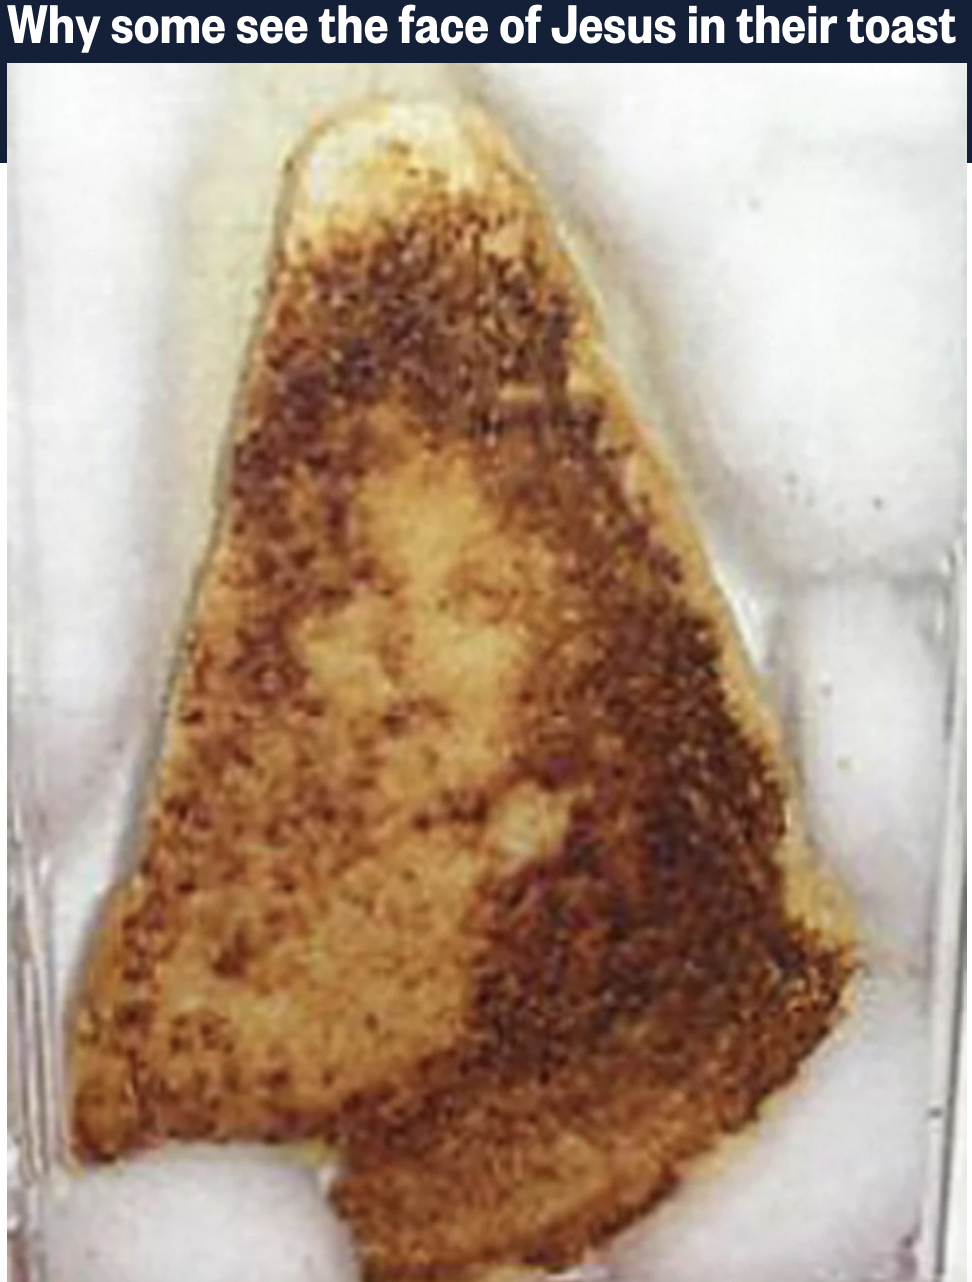 Why some see the face of Jesus in their toast